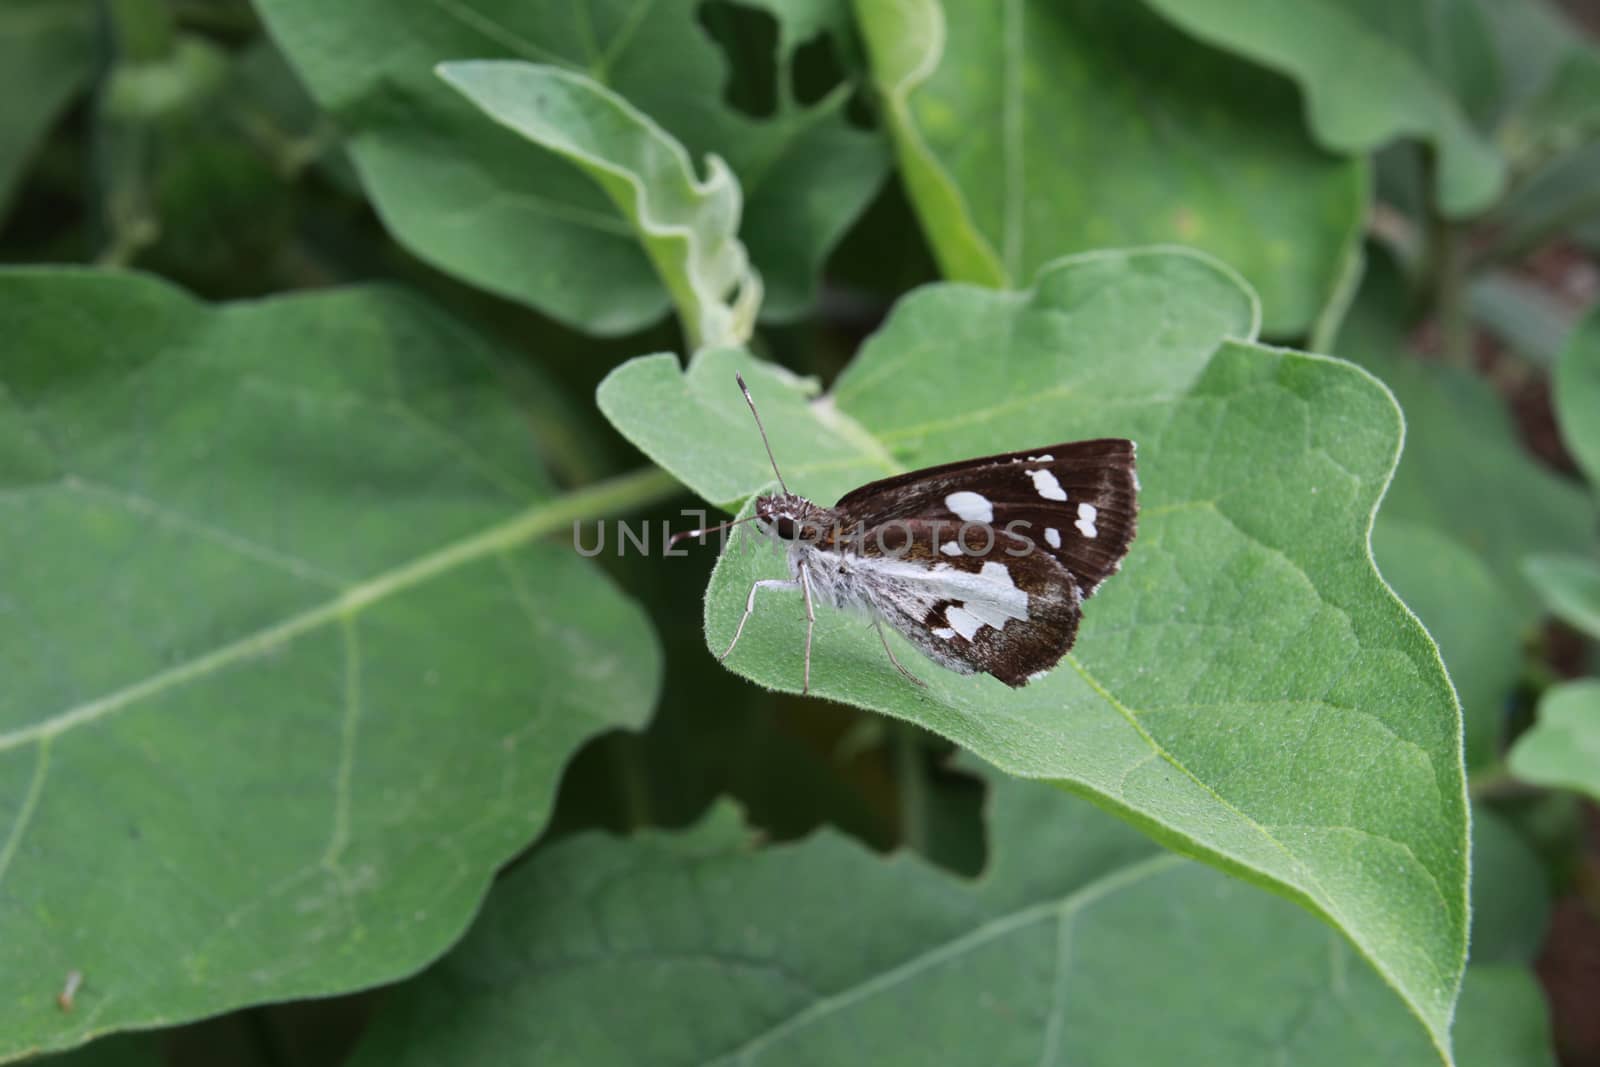 The dark brown butterfly perched on leaves of eggplant.